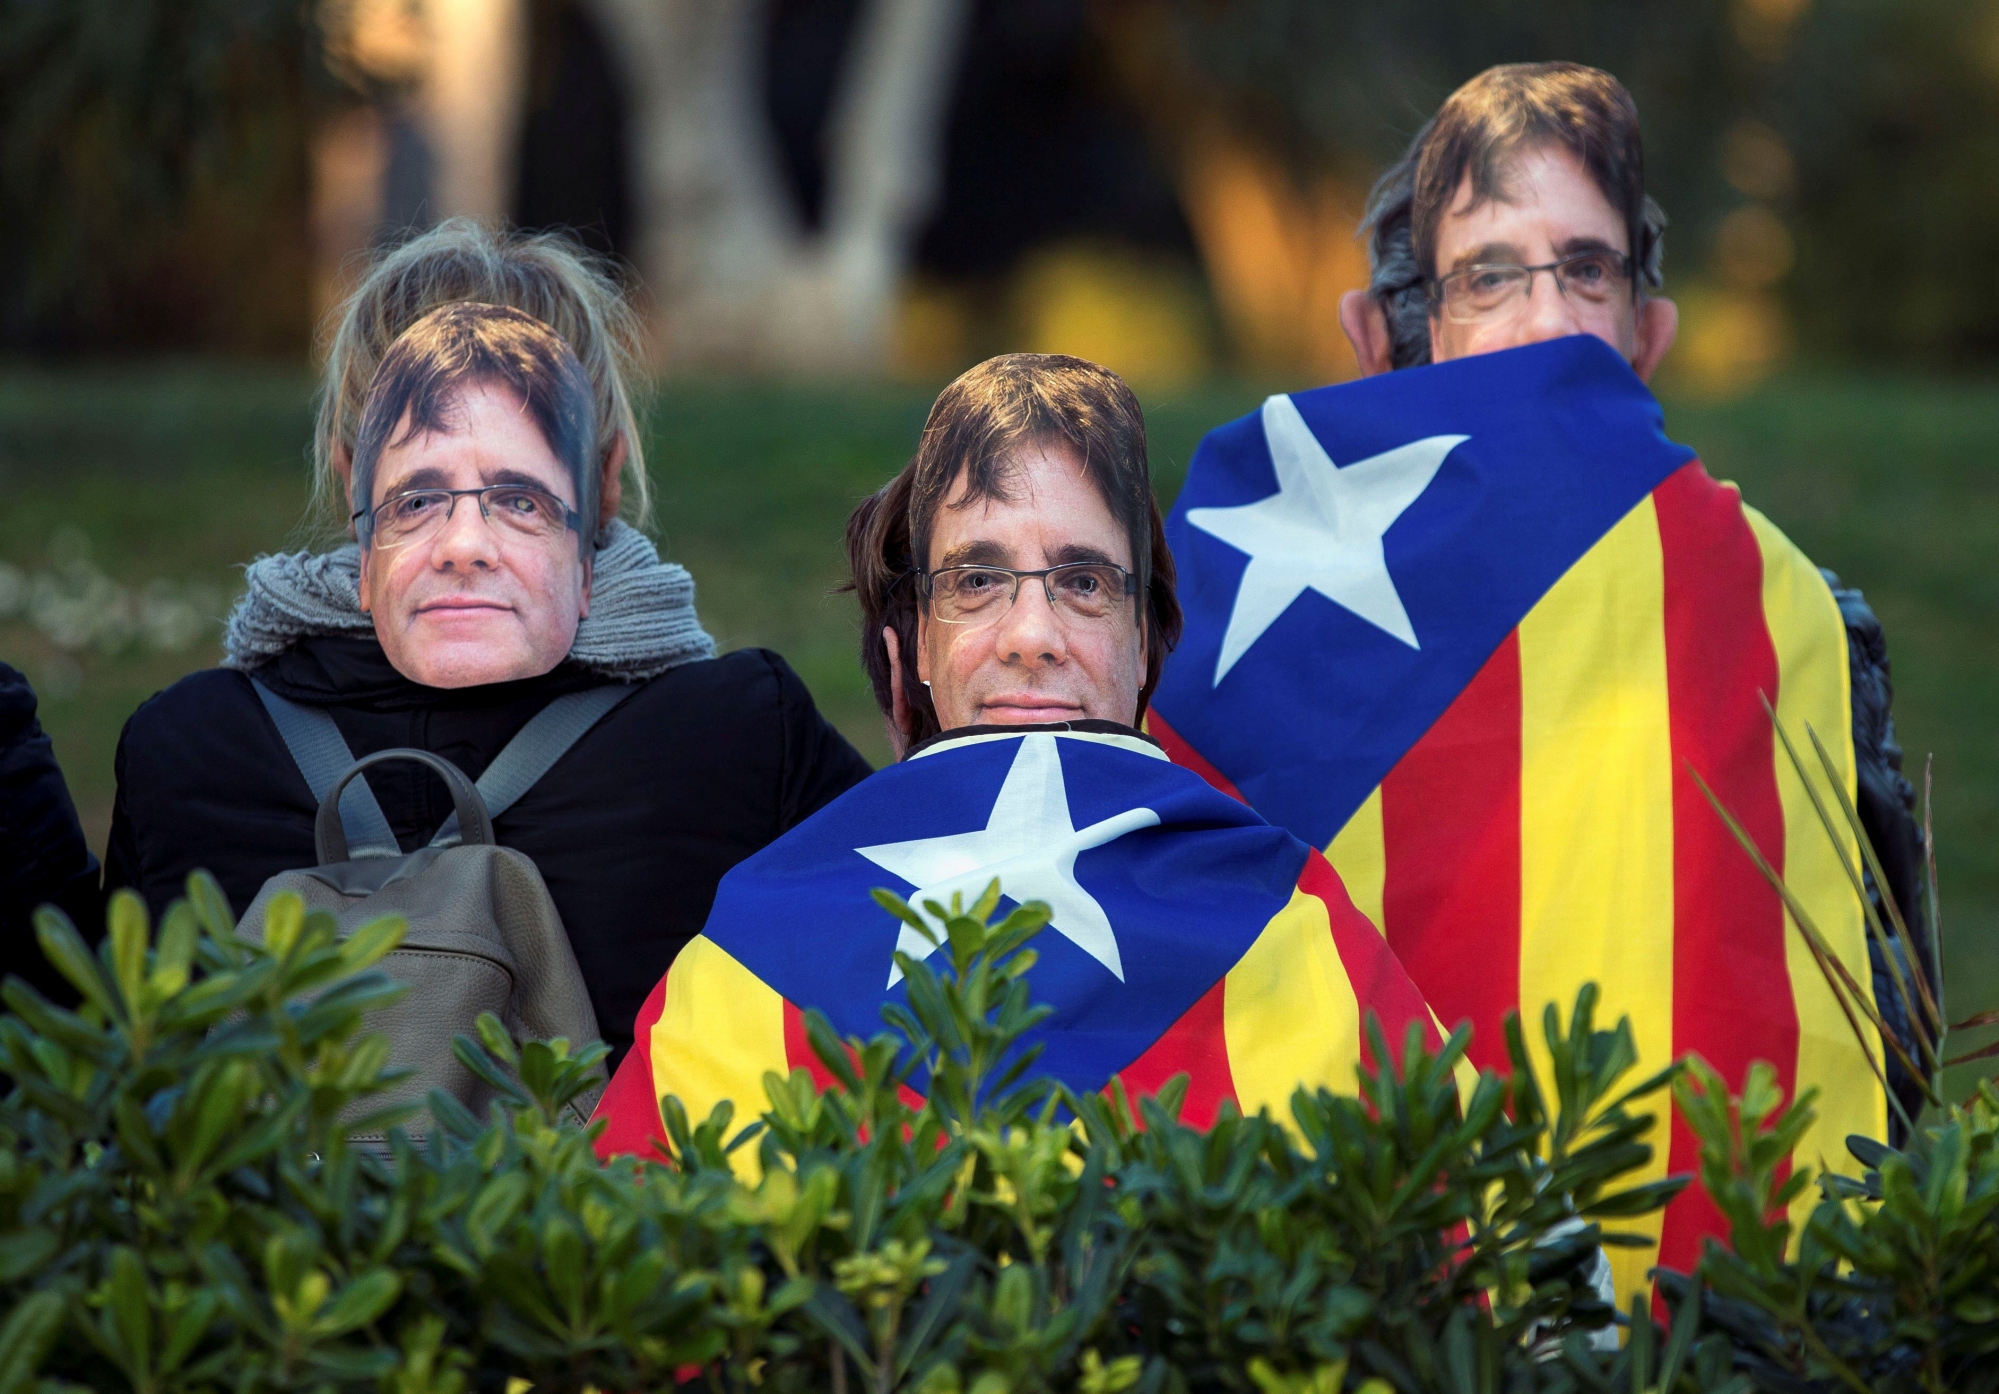 epa06486298 People attend a demonstration in support of former Catalonian President Carles Puigdemont outside the Catalan Parliament in Barcelona, Spain, 30 January 2018. The investiture of the regional President was postponed earlier today in order to give time for the Constitutional Court to study Catalonia's fugitive former President Carles Puigdemont's request to be elected President abroad. Last 27 January 2018, the Constitutional Court announced that Carles Puigdemont must return to Spain if he wants to be elected in the investiture debate.The Court also recalled that Puigdemont would need a judicial permission, despite his presence at the Chamber, as there is still a warrant order in force. EFE/Enric Fontcuberta  EPA/Enric Fontcuberta SPAIN CATALONIA